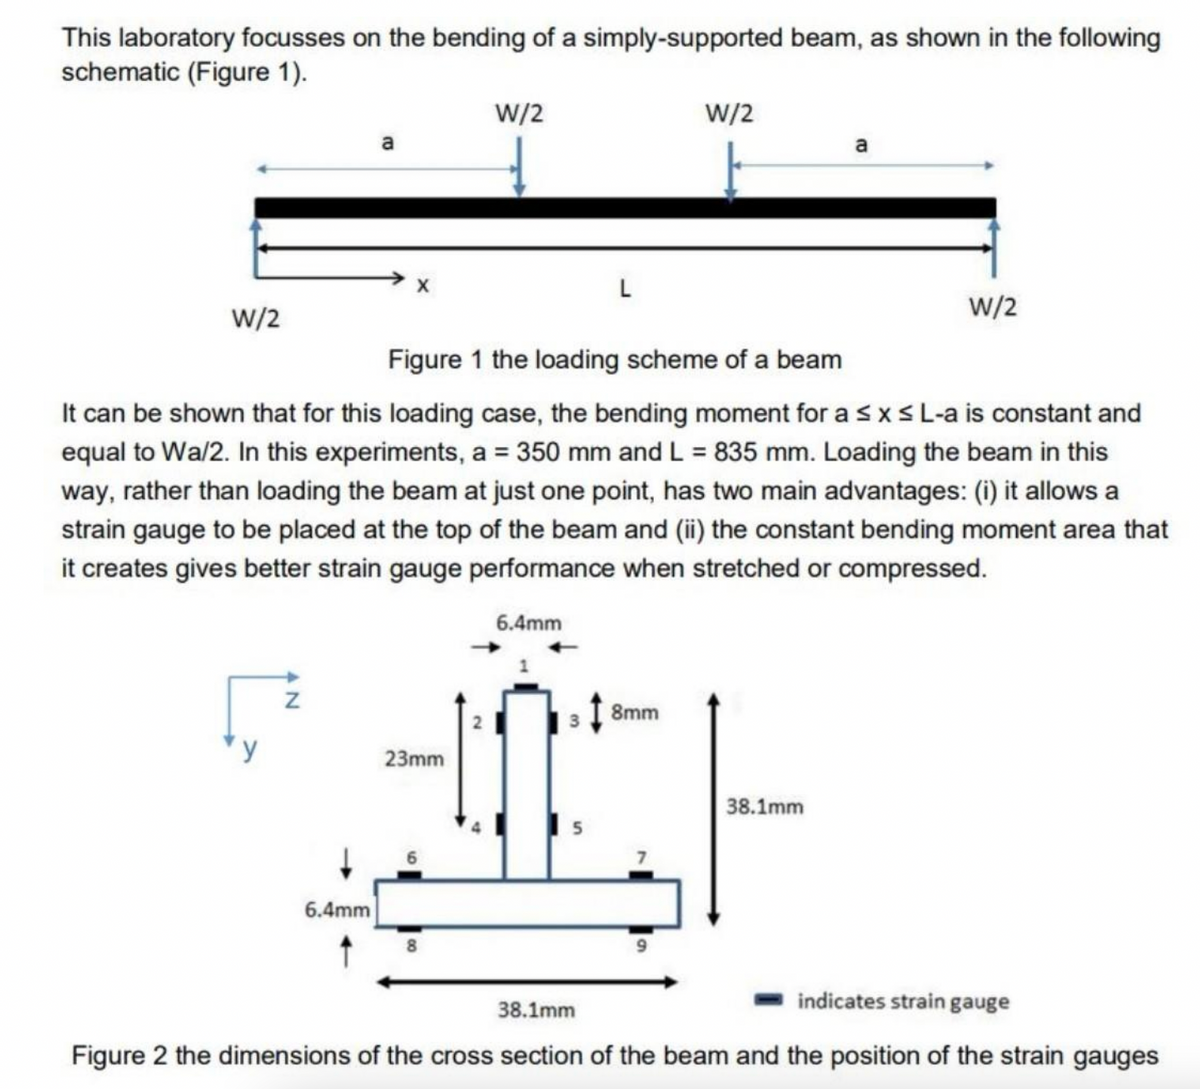 This laboratory focusses on the bending of a simply-supported beam, as shown in the following
schematic (Figure 1).
W/2
Z
a
6.4mm
X
W/2
23mm
Figure 1 the loading scheme of a beam
It can be shown that for this loading case, the bending moment for a ≤ x ≤ L-a is constant and
equal to Wa/2. In this experiments, a = 350 mm and L = 835 mm. Loading the beam in this
way, rather than loading the beam at just one point, has two main advantages: (i) it allows a
strain gauge to be placed at the top of the beam and (ii) the constant bending moment area that
it creates gives better strain gauge performance when stretched or compressed.
6.4mm
W/2
8mm
a
38.1mm
W/2
indicates strain gauge
38.1mm
Figure 2 the dimensions of the cross section of the beam and the position of the strain gauges